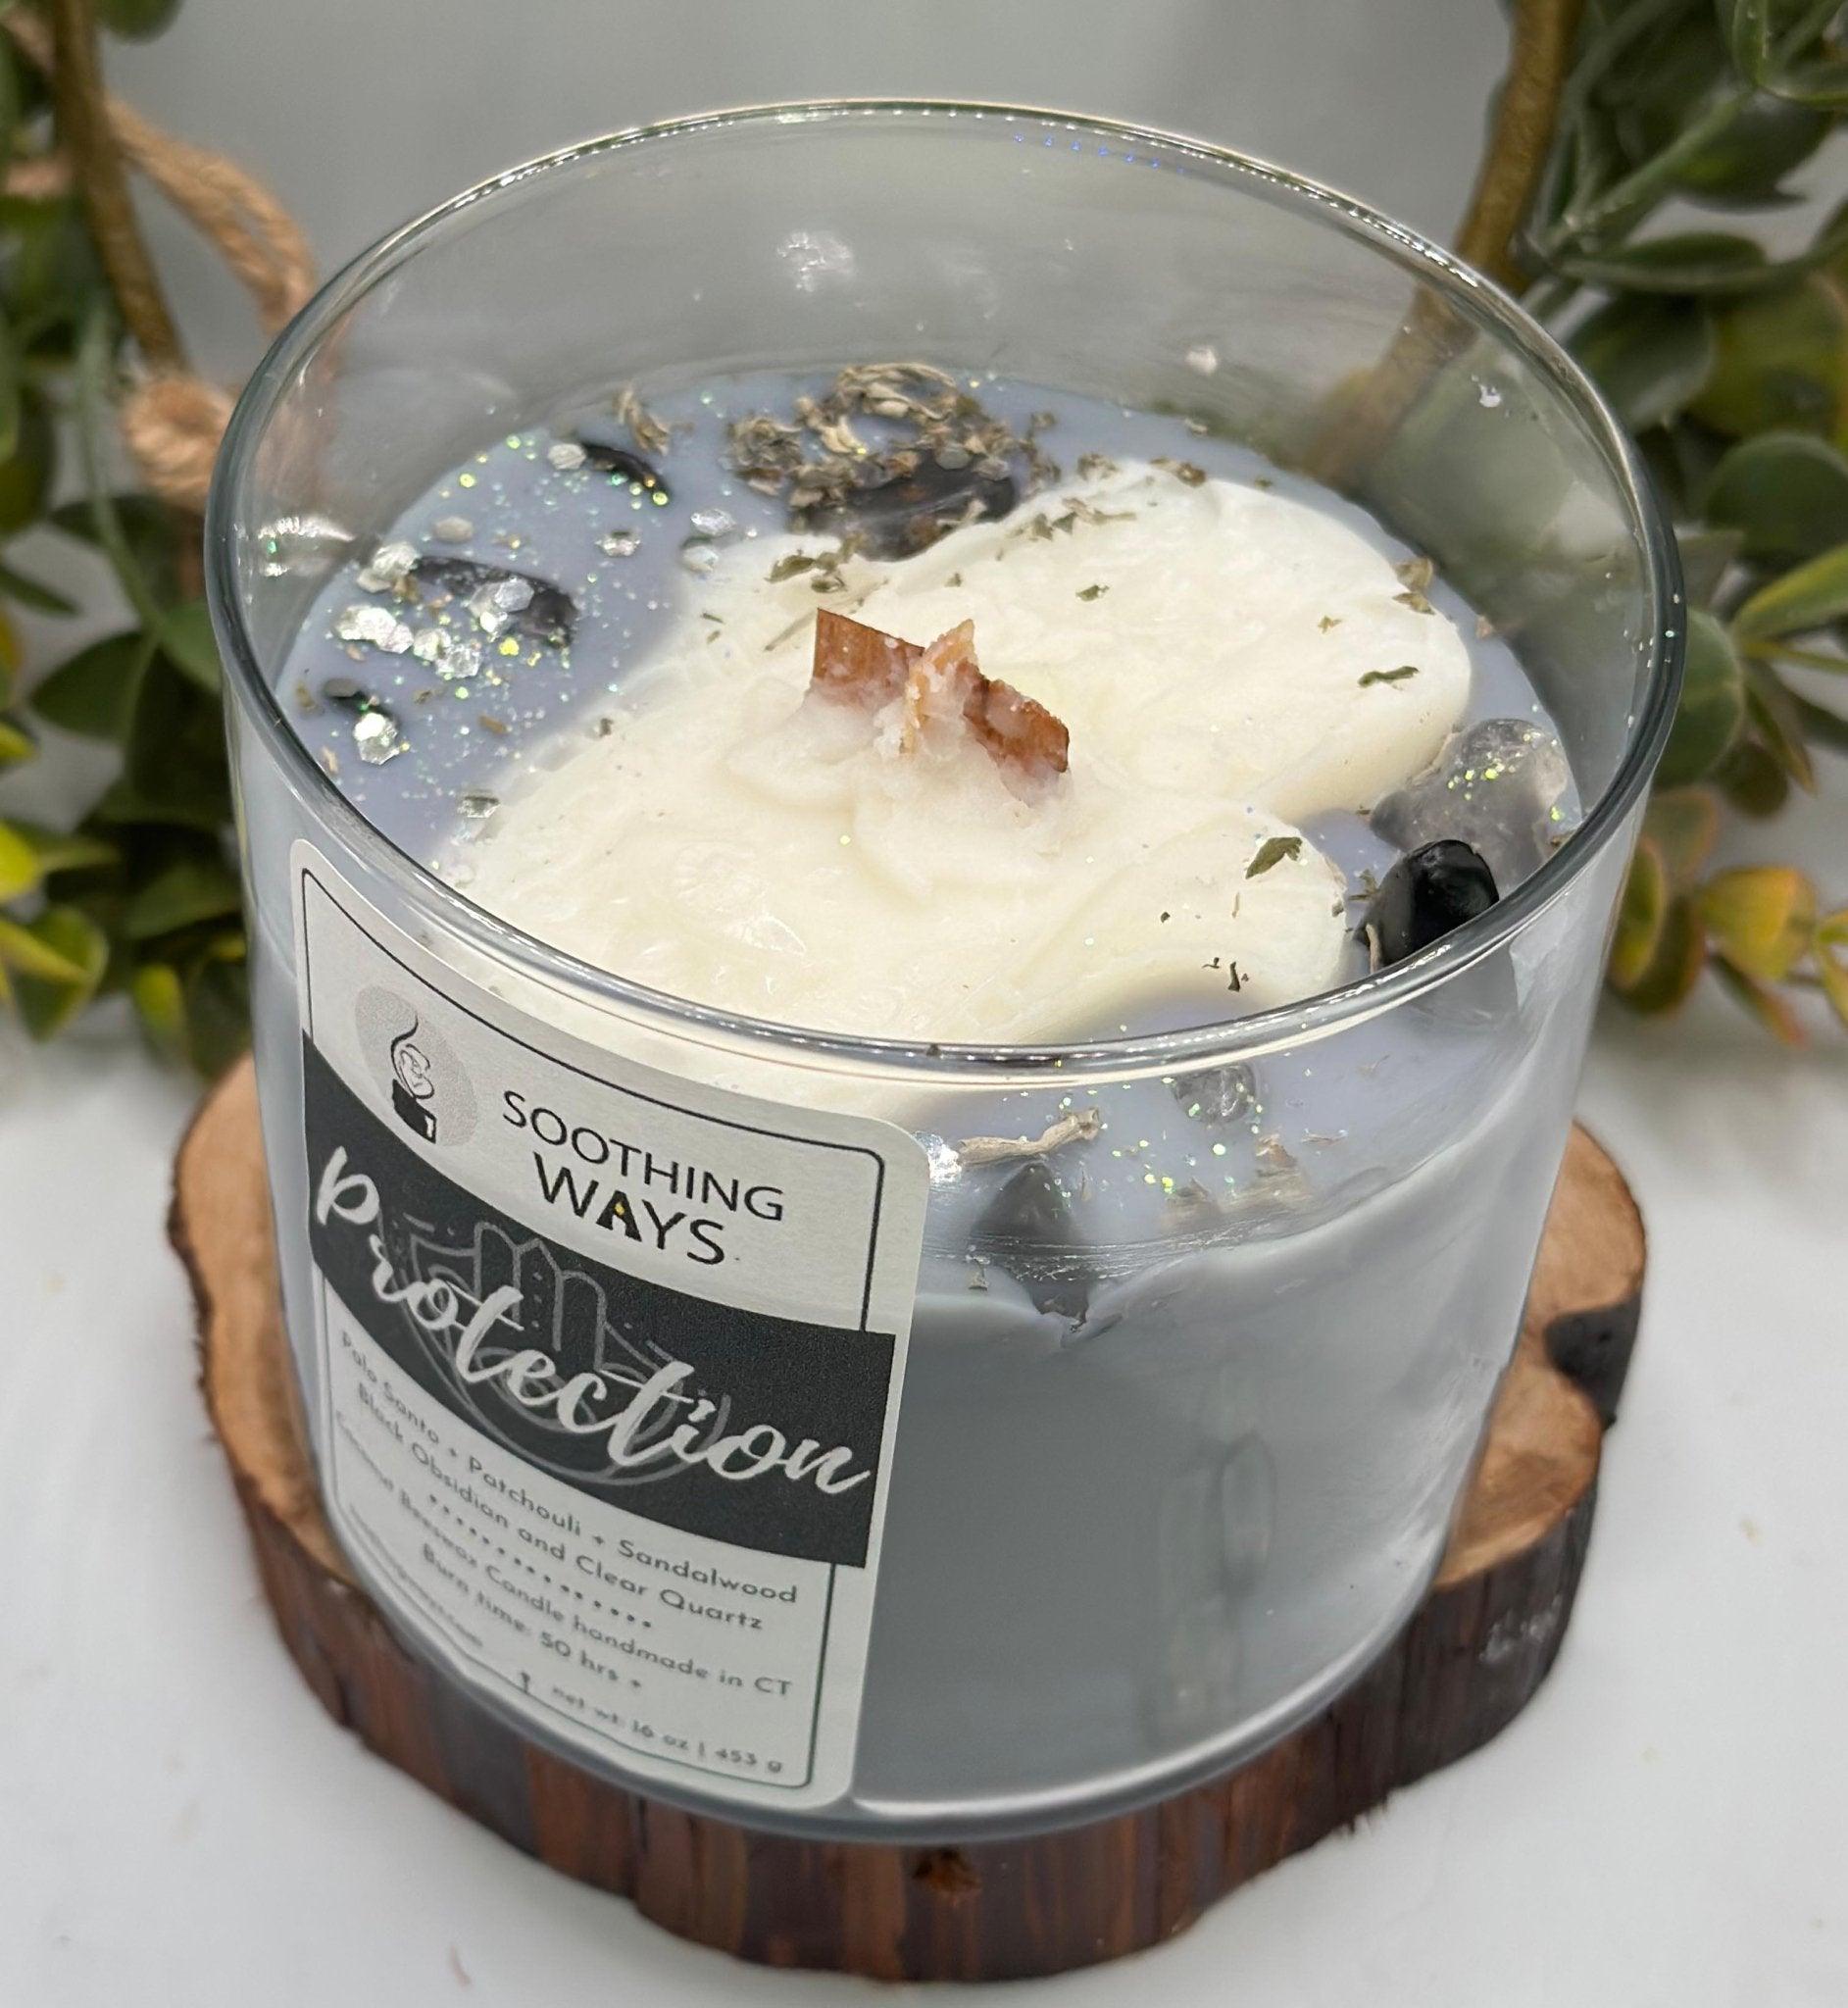 Protection 16 oz Candle - Soothing Ways